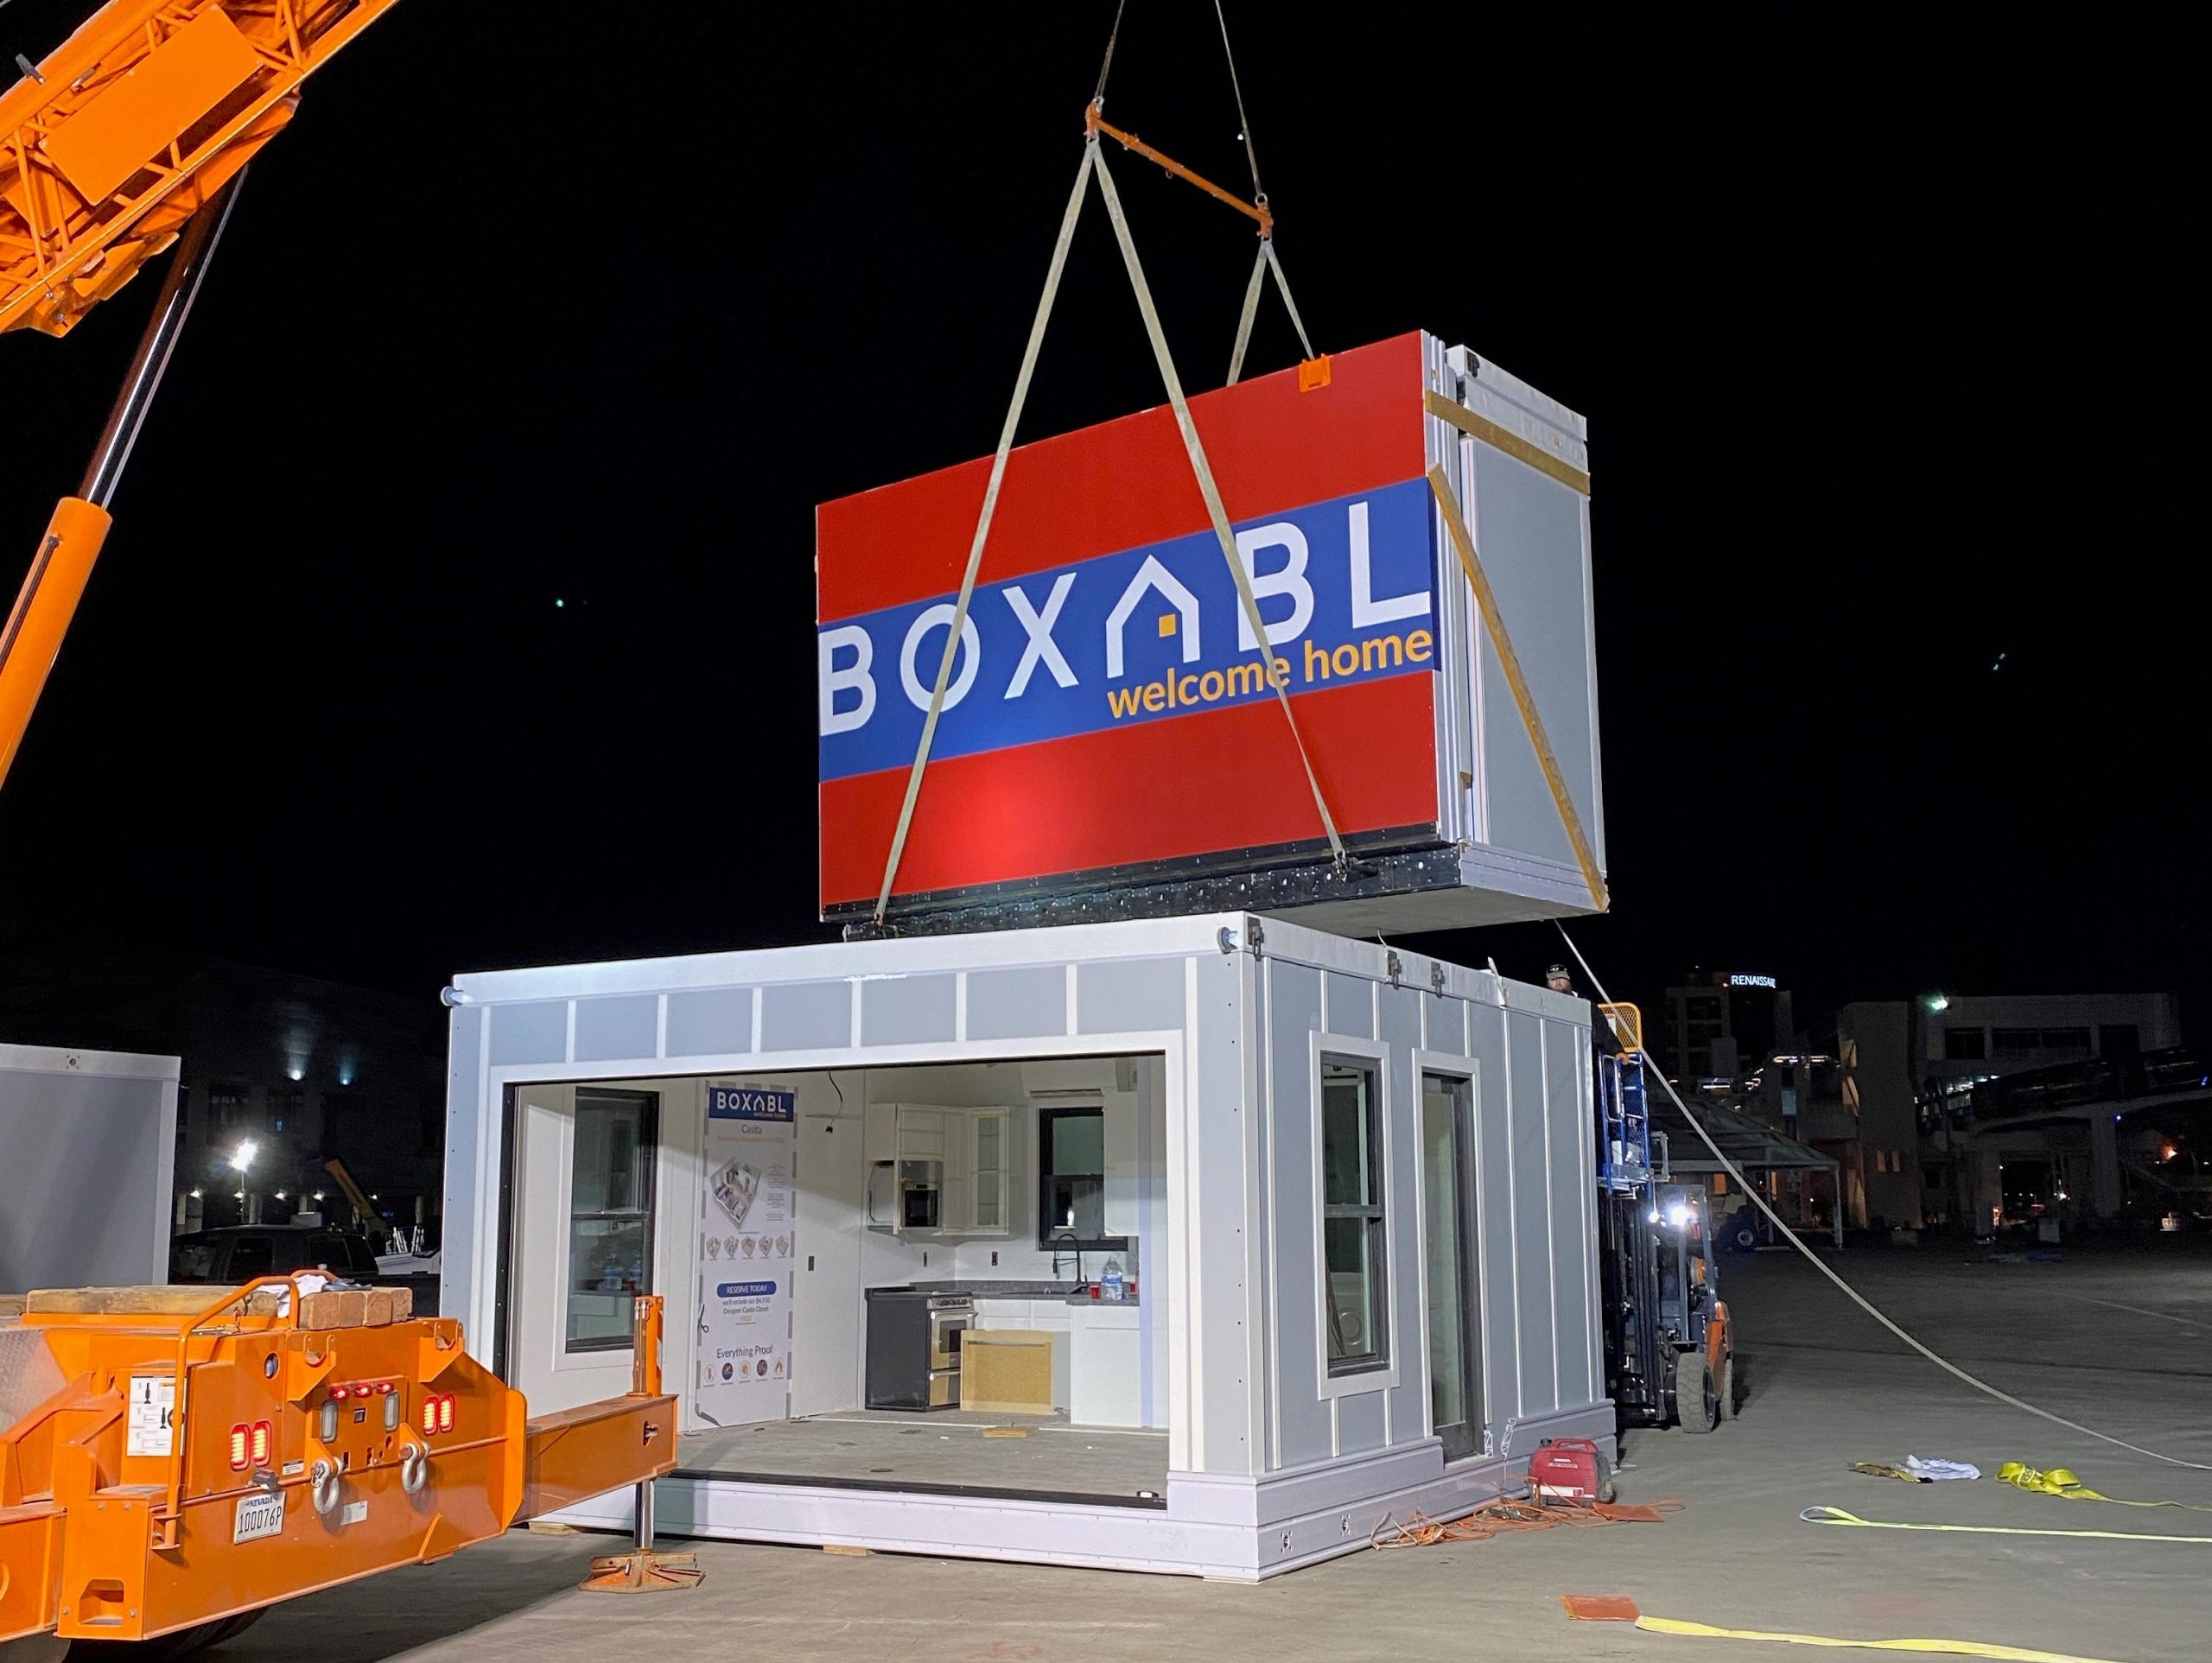 Casita being set up outside with a Boxabl unit being lowered down with a crane.